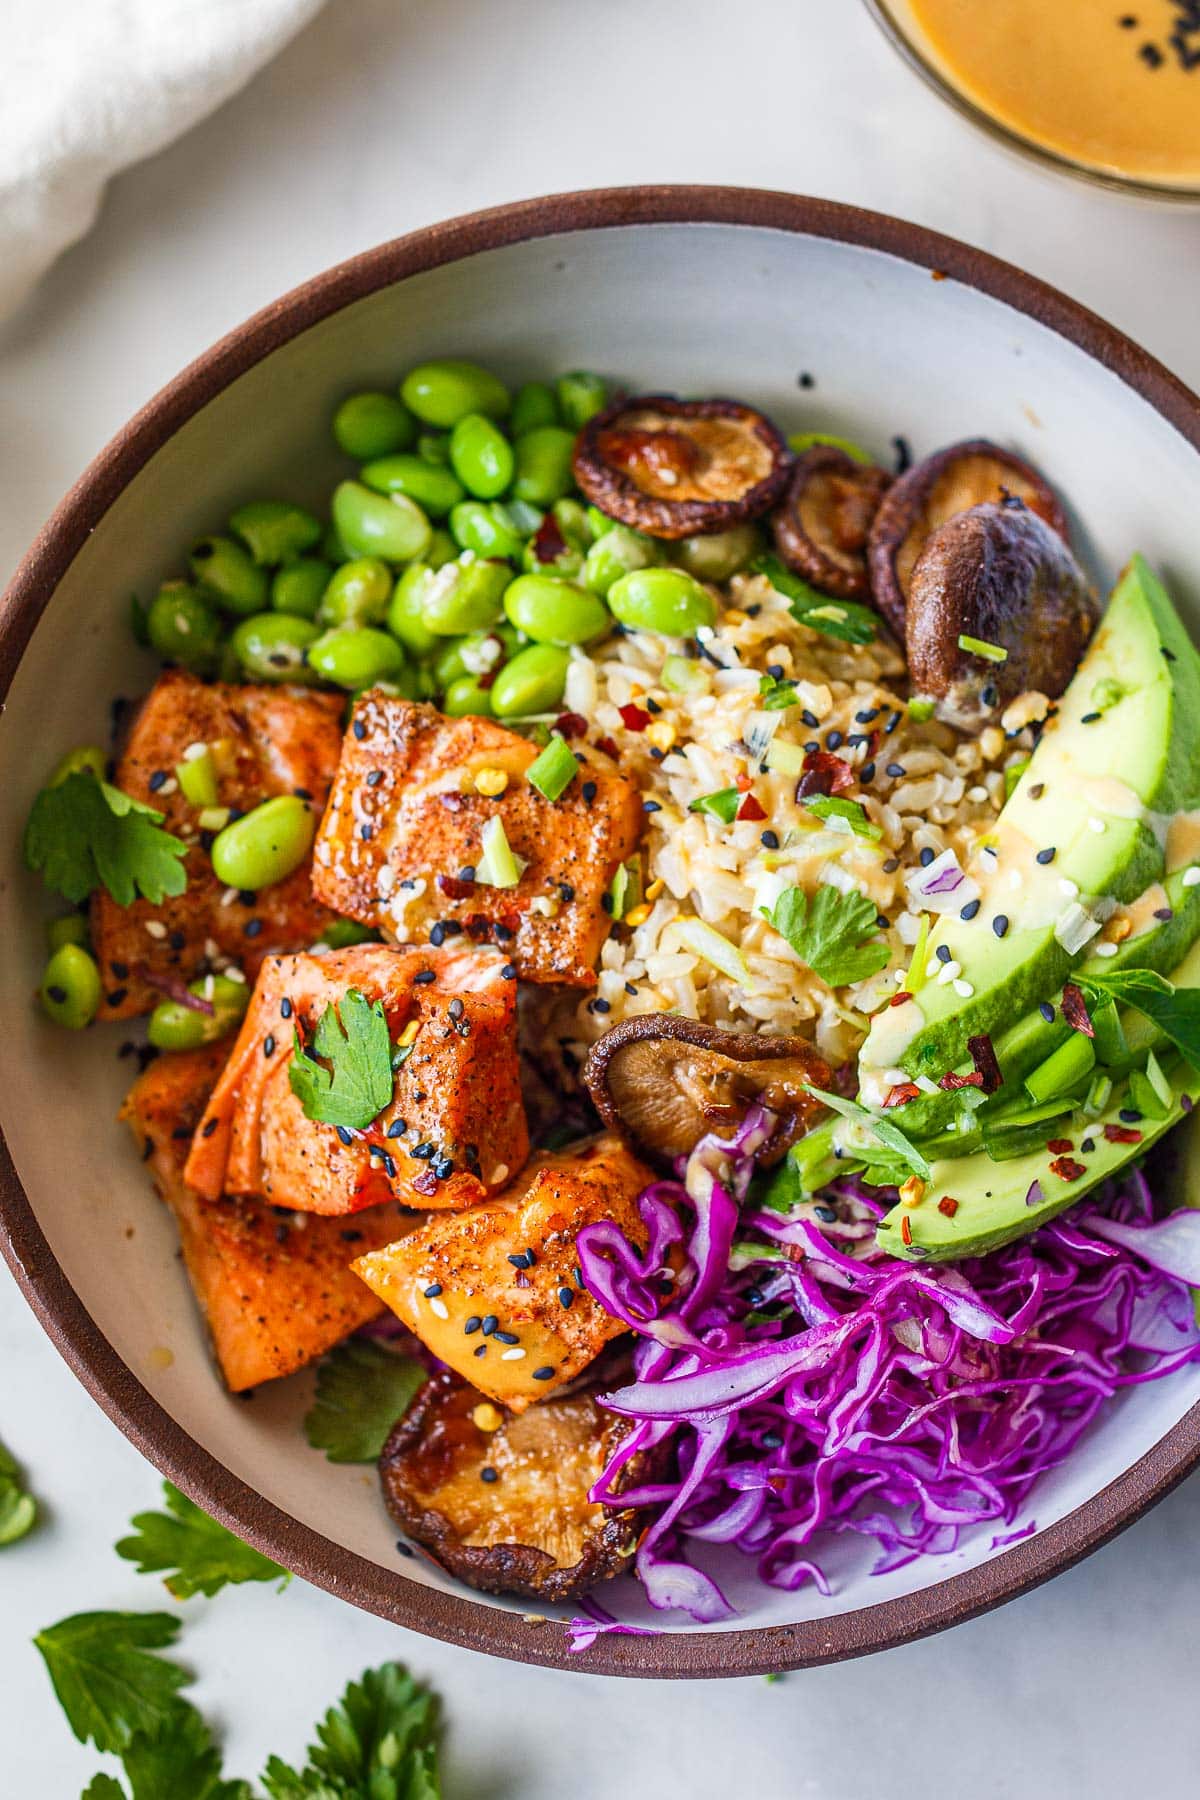 This Salmon Bowl is brimming with healthy protein, healthy veggies, and savory Asian flavors. Salmon bites are paired with roasted shiitake mushrooms, edamame, avocado, and red cabbage drizzled with a delicious miso dressing.